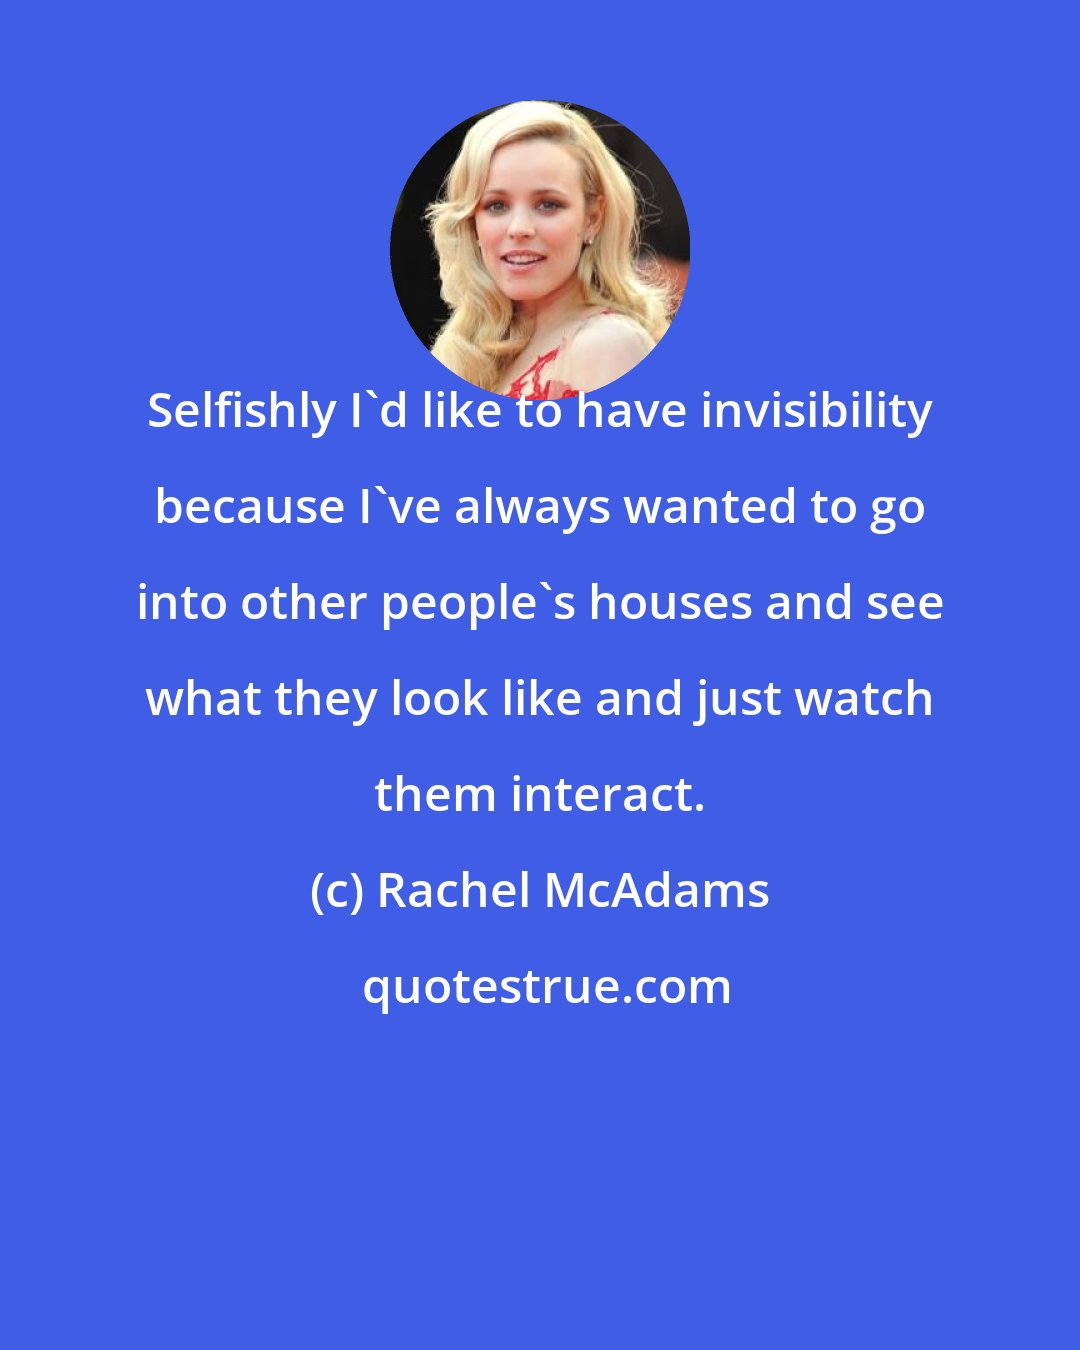 Rachel McAdams: Selfishly I'd like to have invisibility because I've always wanted to go into other people's houses and see what they look like and just watch them interact.